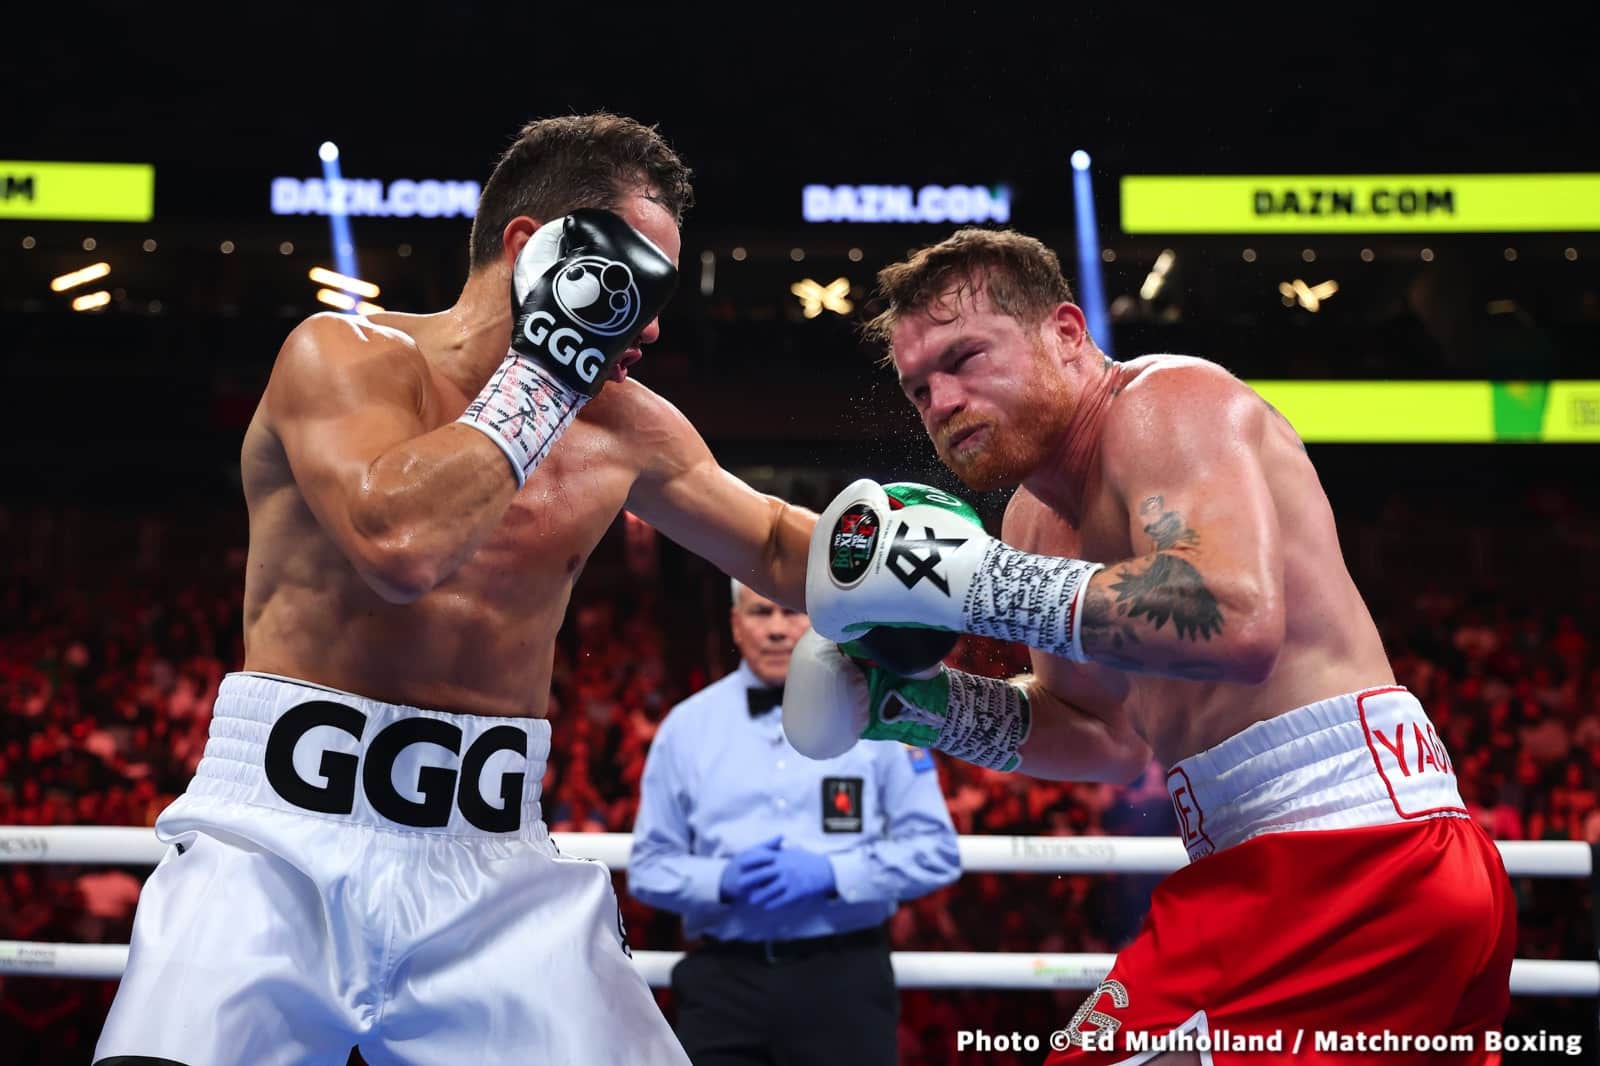 Canelo was worried about his conditioning against Golovkin says Oscar De La Hoya